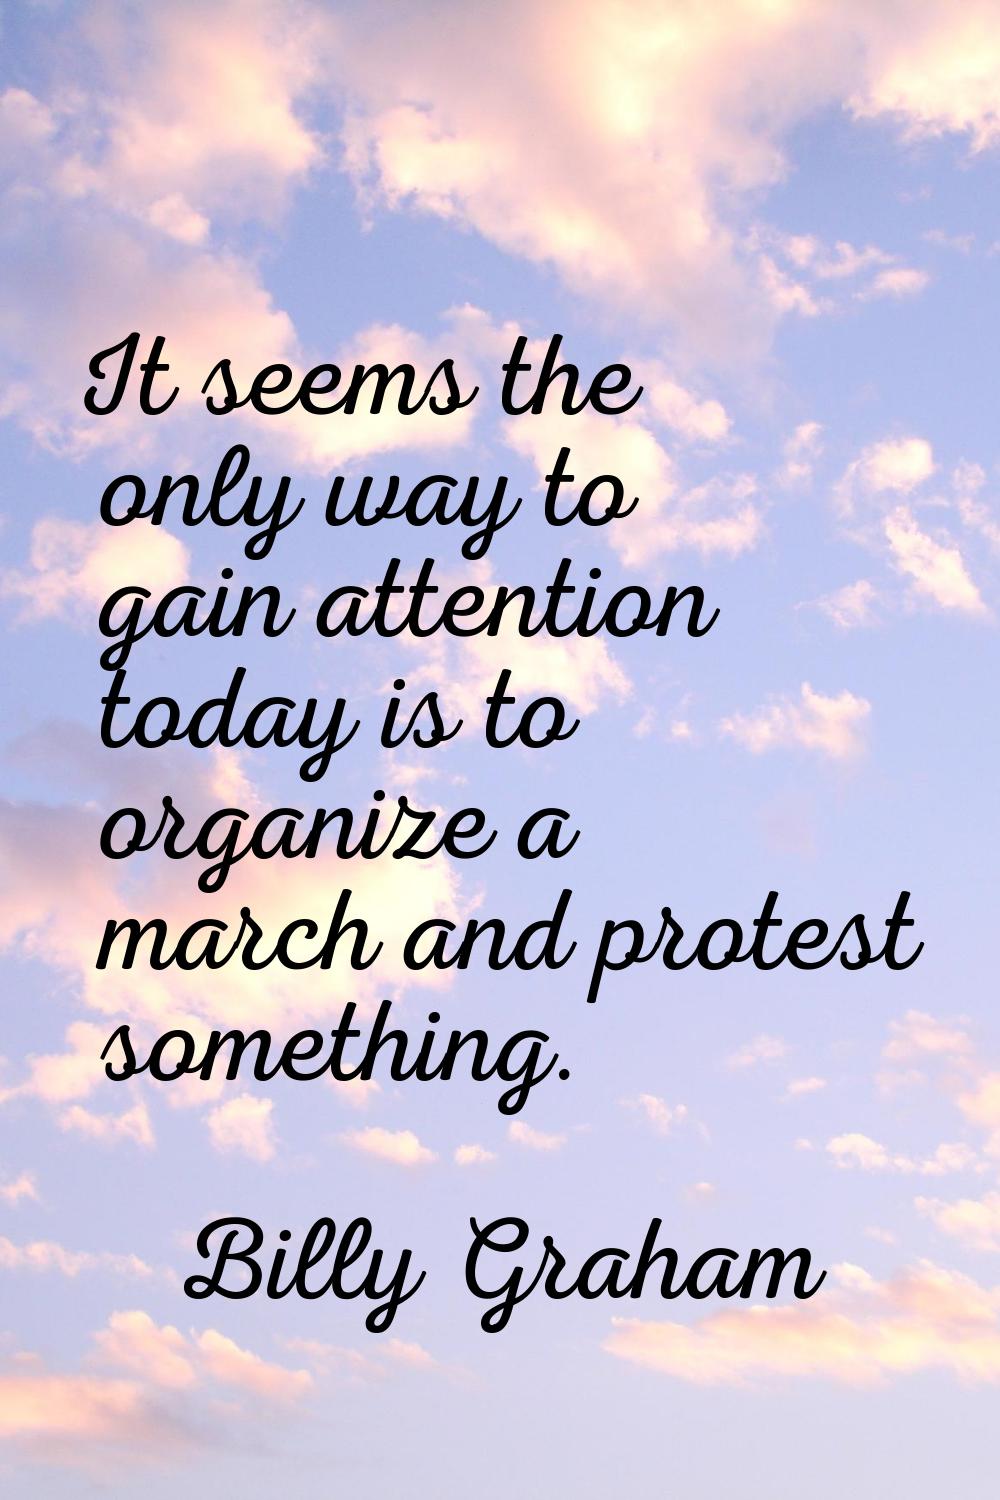 It seems the only way to gain attention today is to organize a march and protest something.